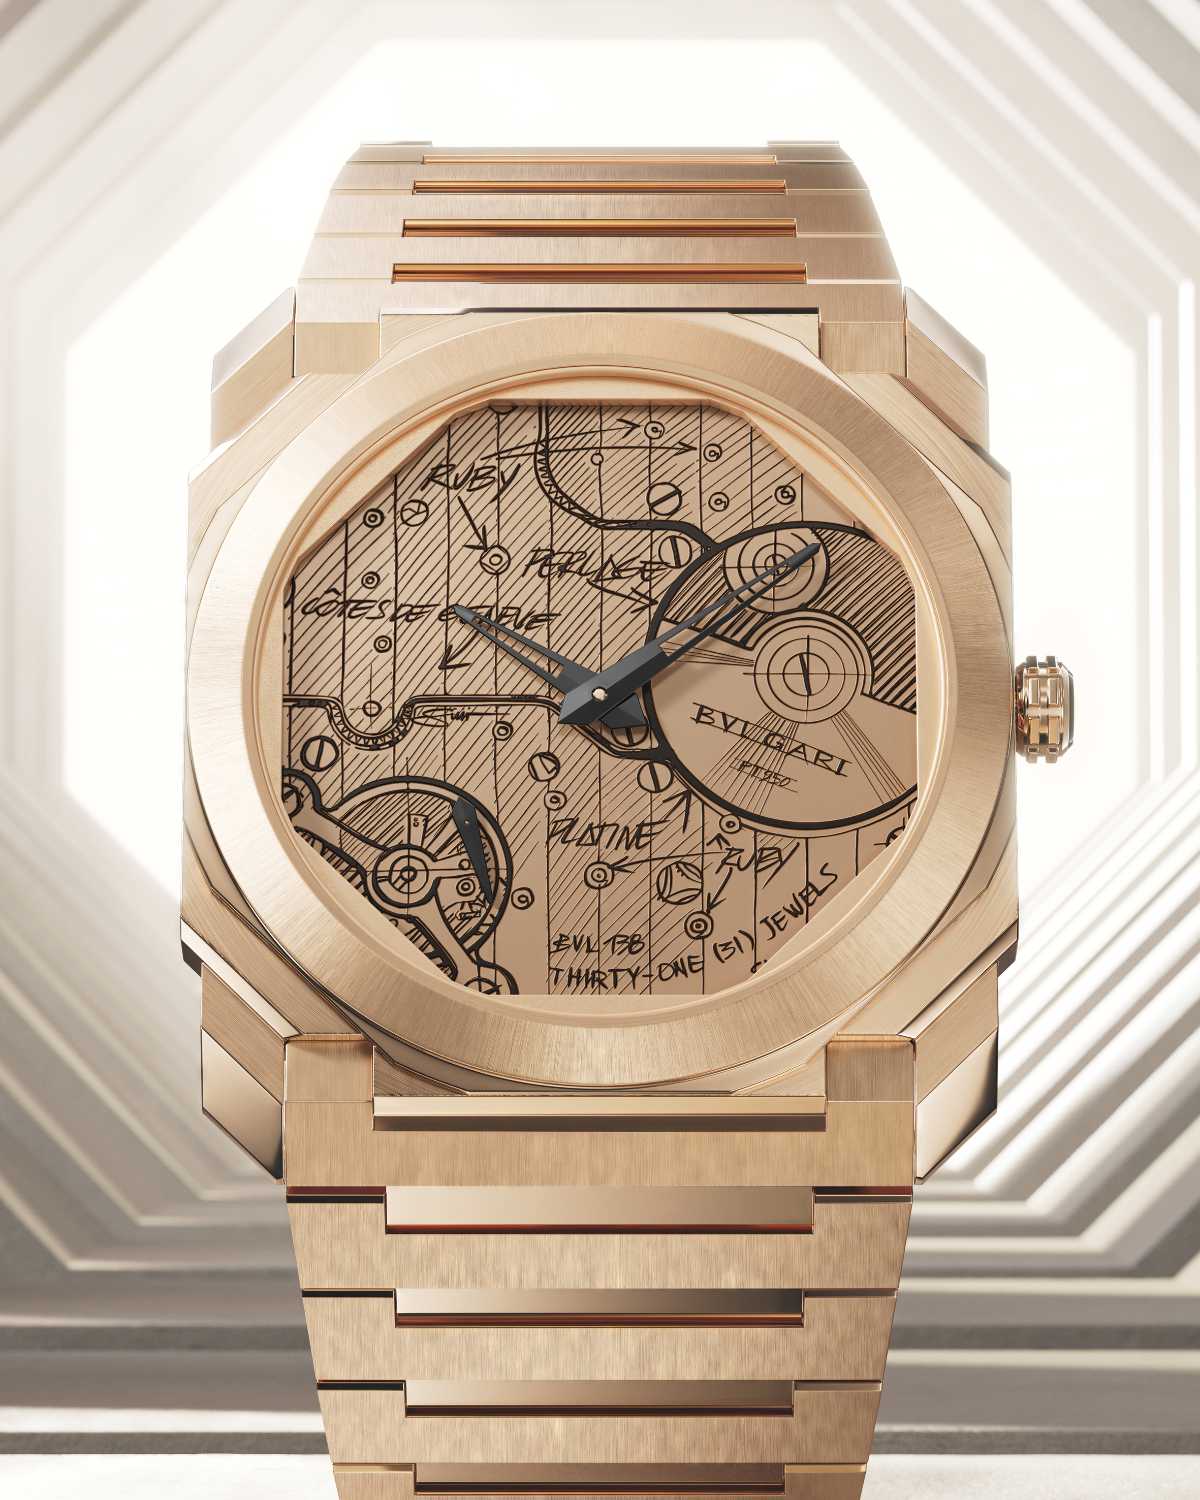 The New Bulgari's Octo Finissimo Sketch Watch: The Art Of Drawing